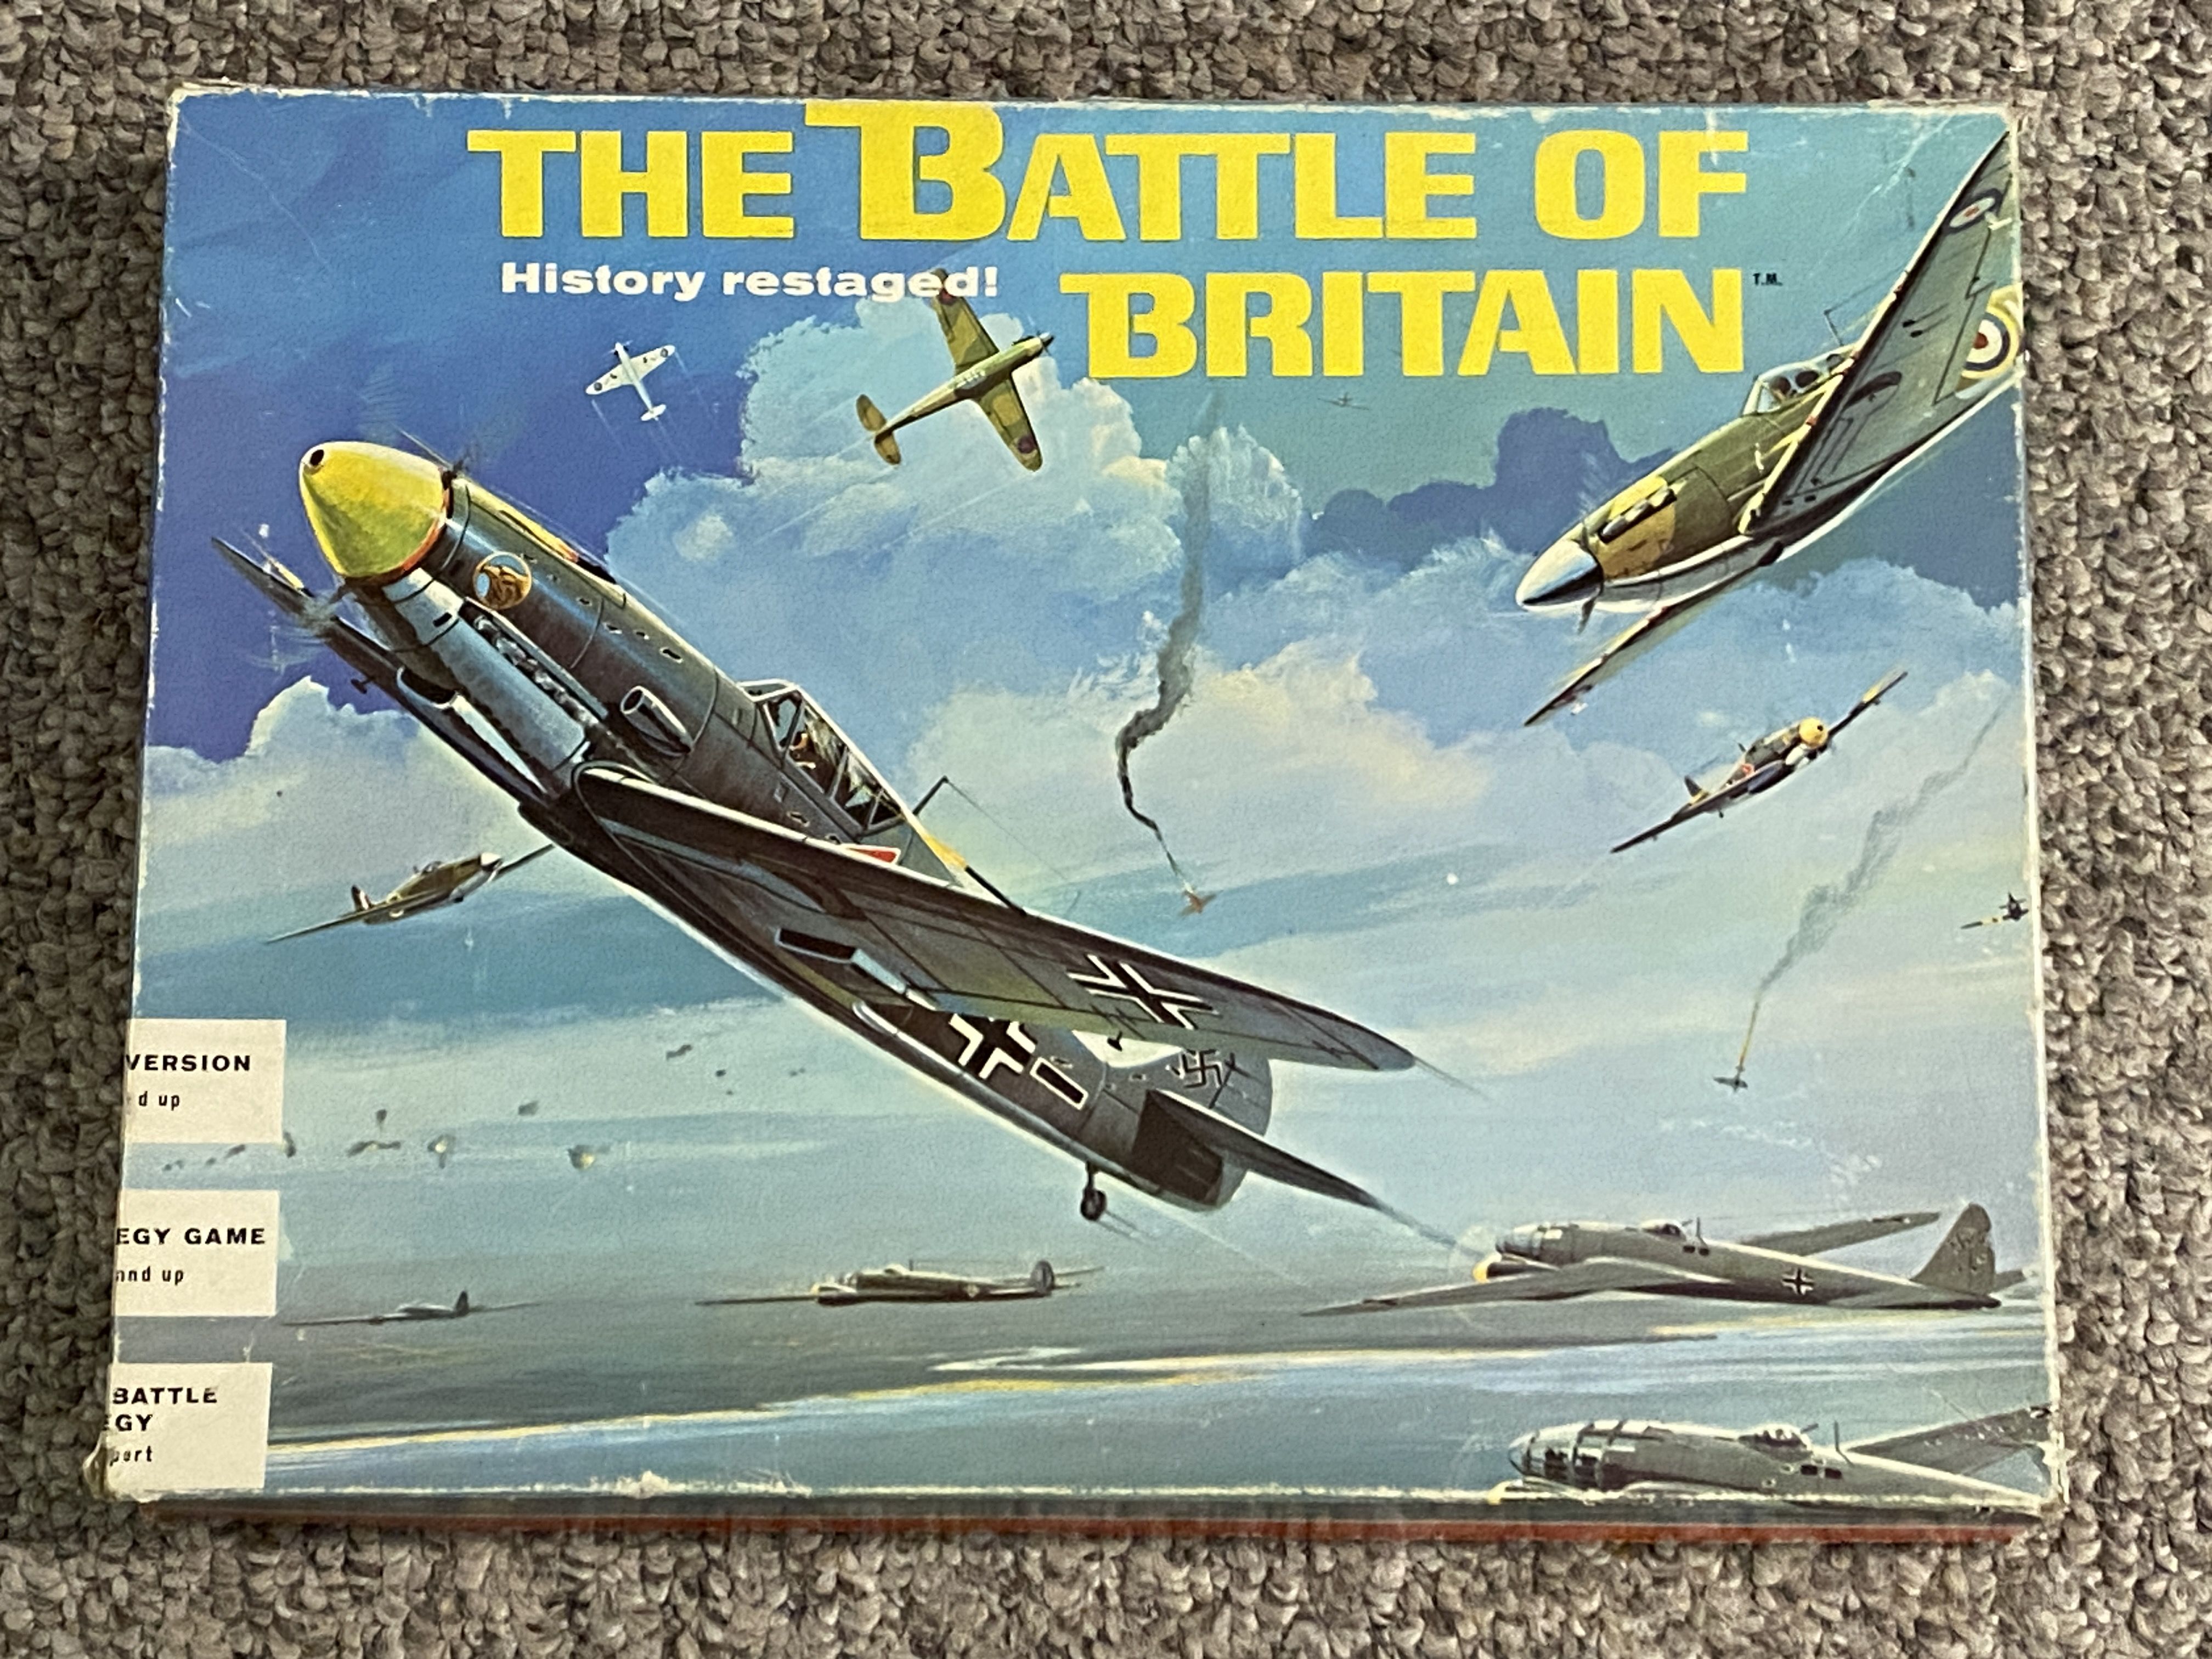 Product Details | The Battle of Britain | GeekMarket